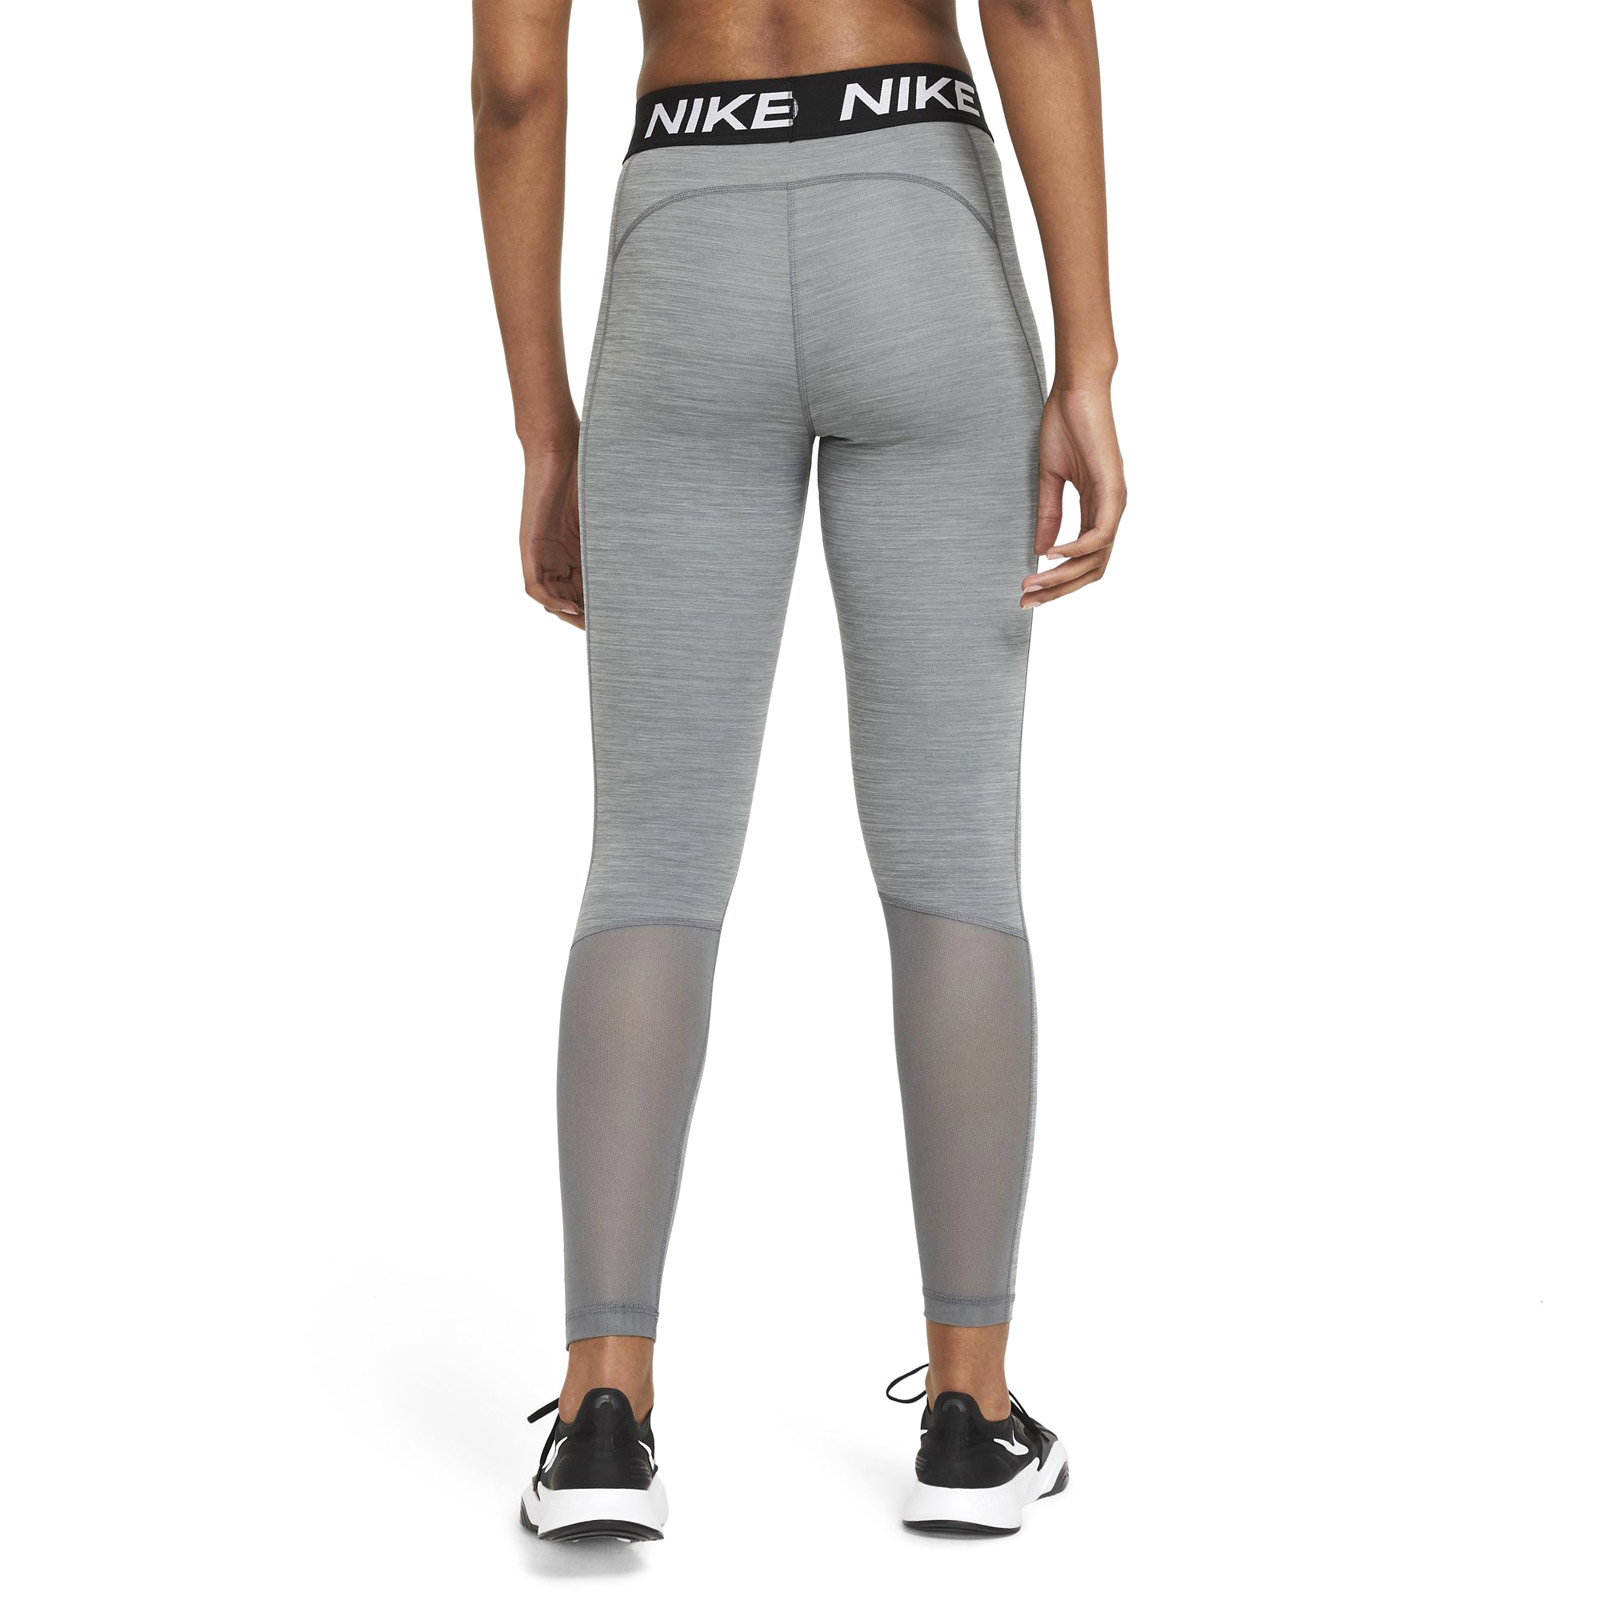 NIKE PRO WOMENS MID-RISE TIGHTS